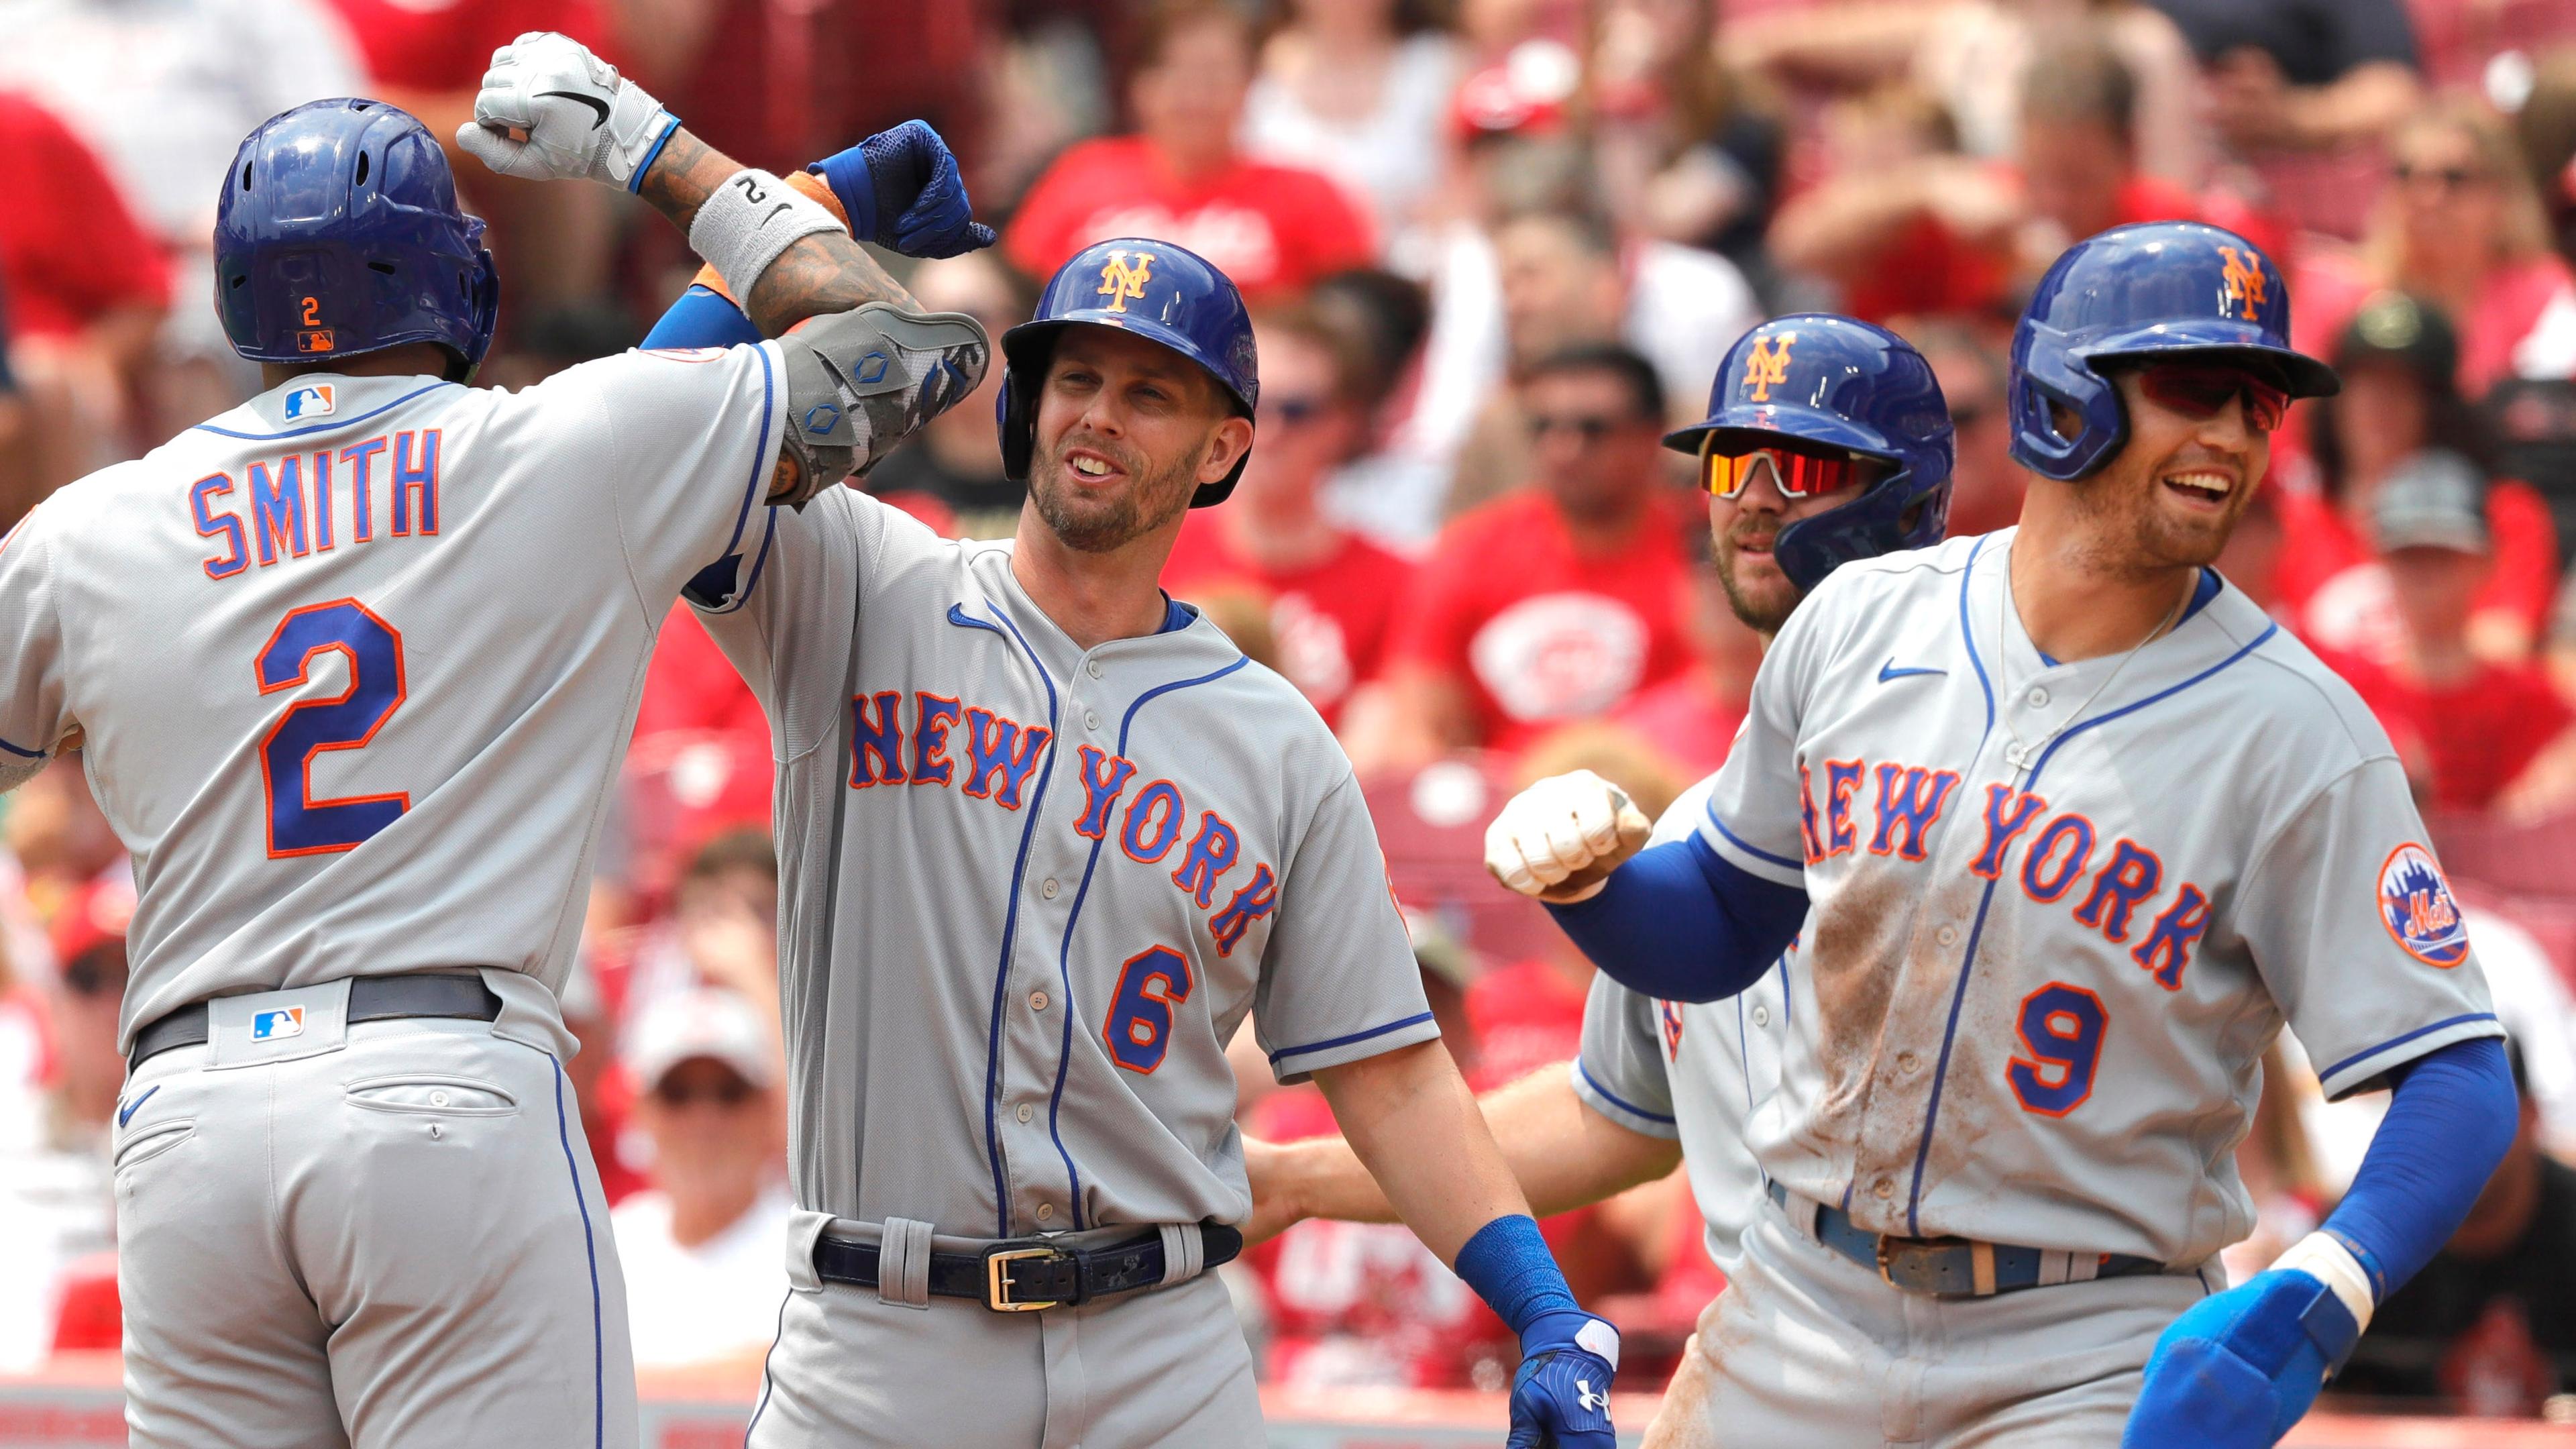 Jul 21, 2021; Cincinnati, Ohio, USA; New York Mets left fielder Dominic Smith (2) celebrates with second baseman Jeff McNeil (6) center fielder Brandon Nimmo (9) and first baseman Pete Alonso (20) after hitting a grand slam home run against the Cincinnati Reds in the third inning at Great American Ball Park. / David Kohl-USA TODAY Sports